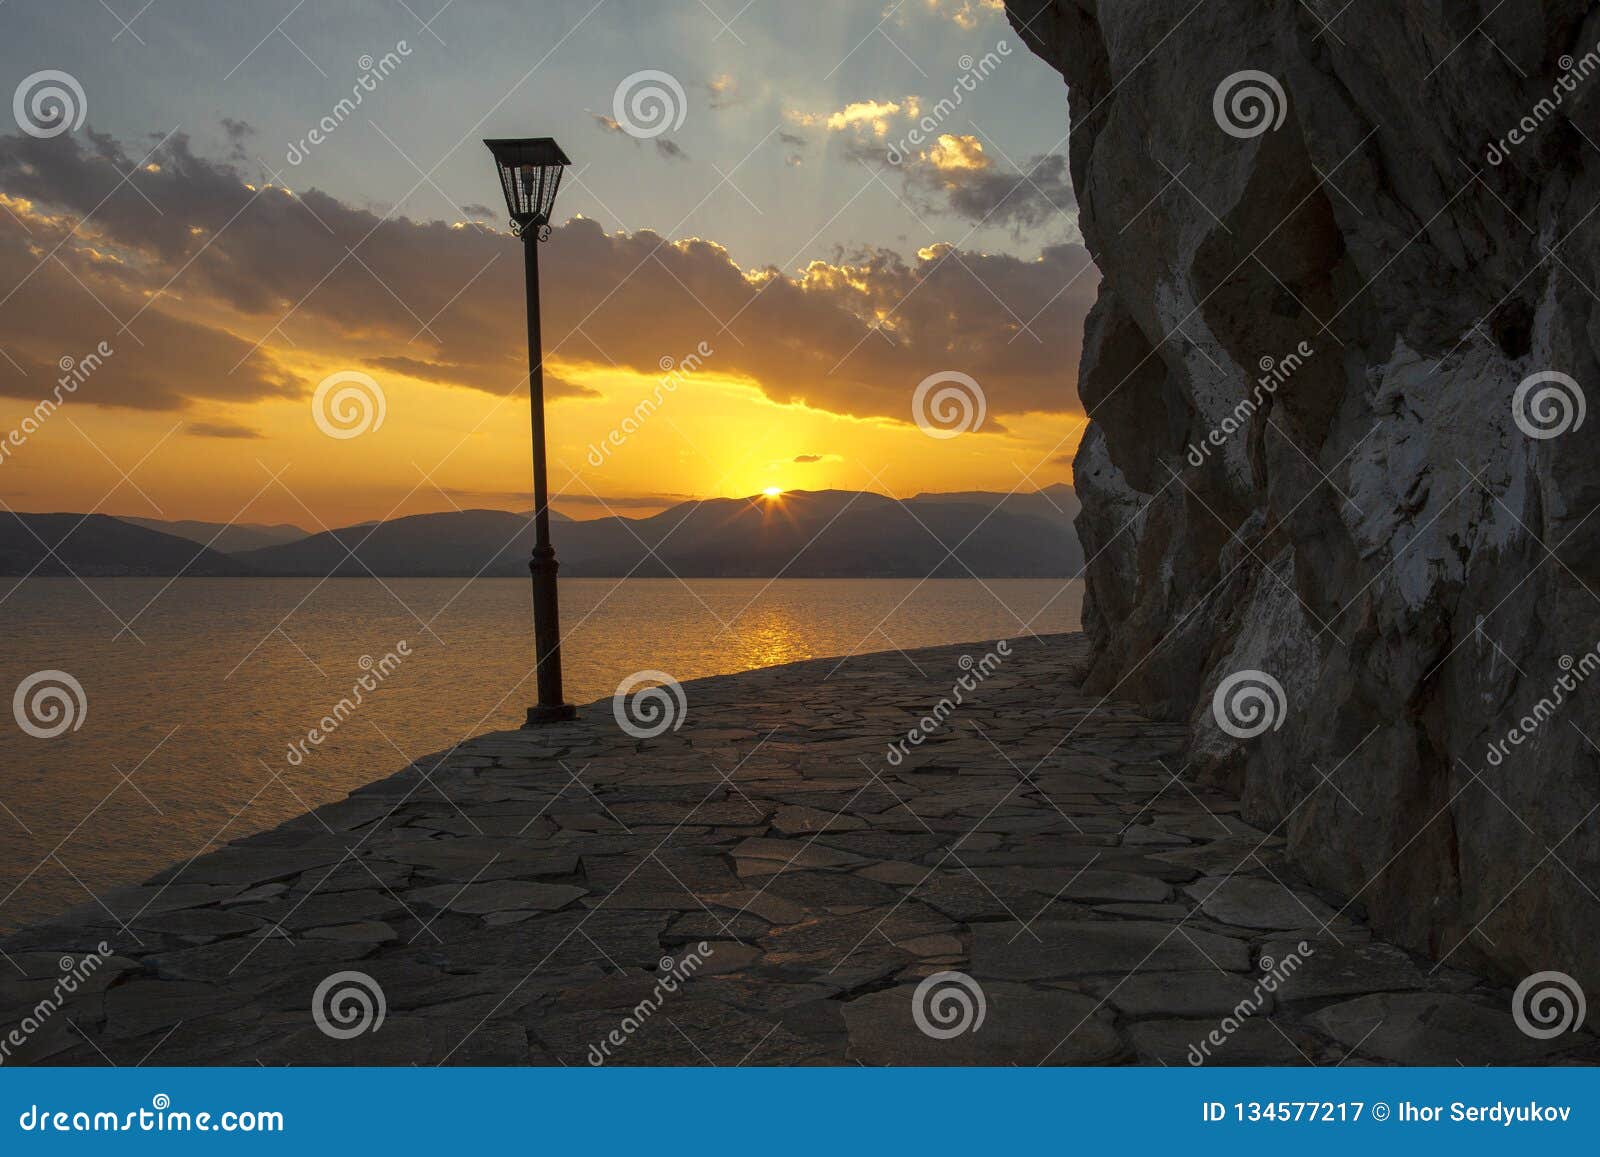 nafplio city in greece. view to old city of nafplio, peloponnese, greece -immagine